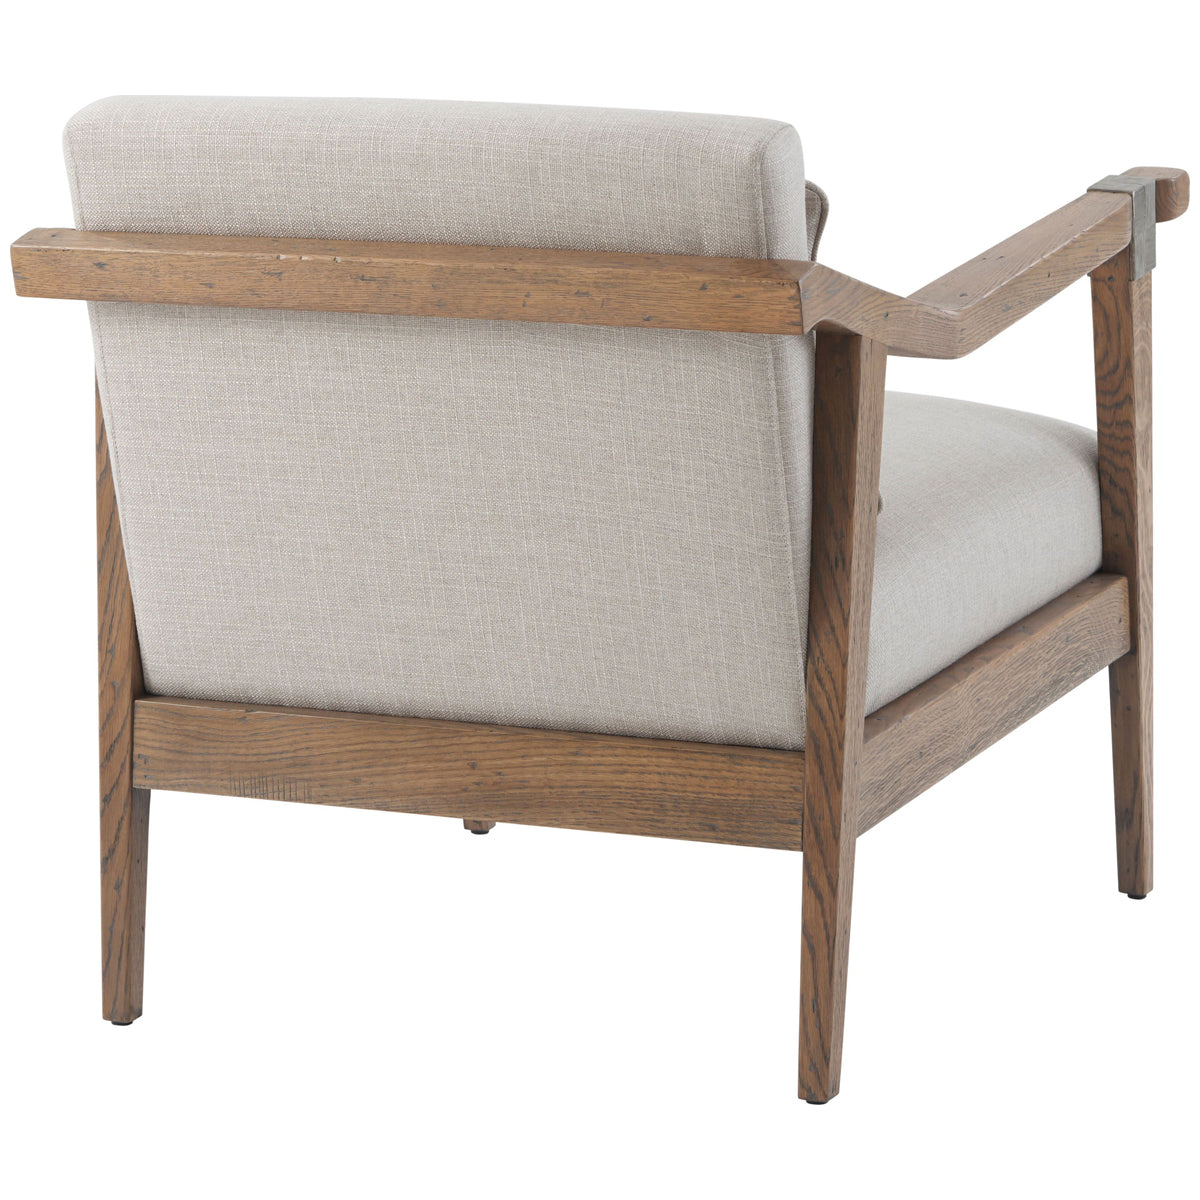 Theodore Alexander Bryson Upholstered Chair